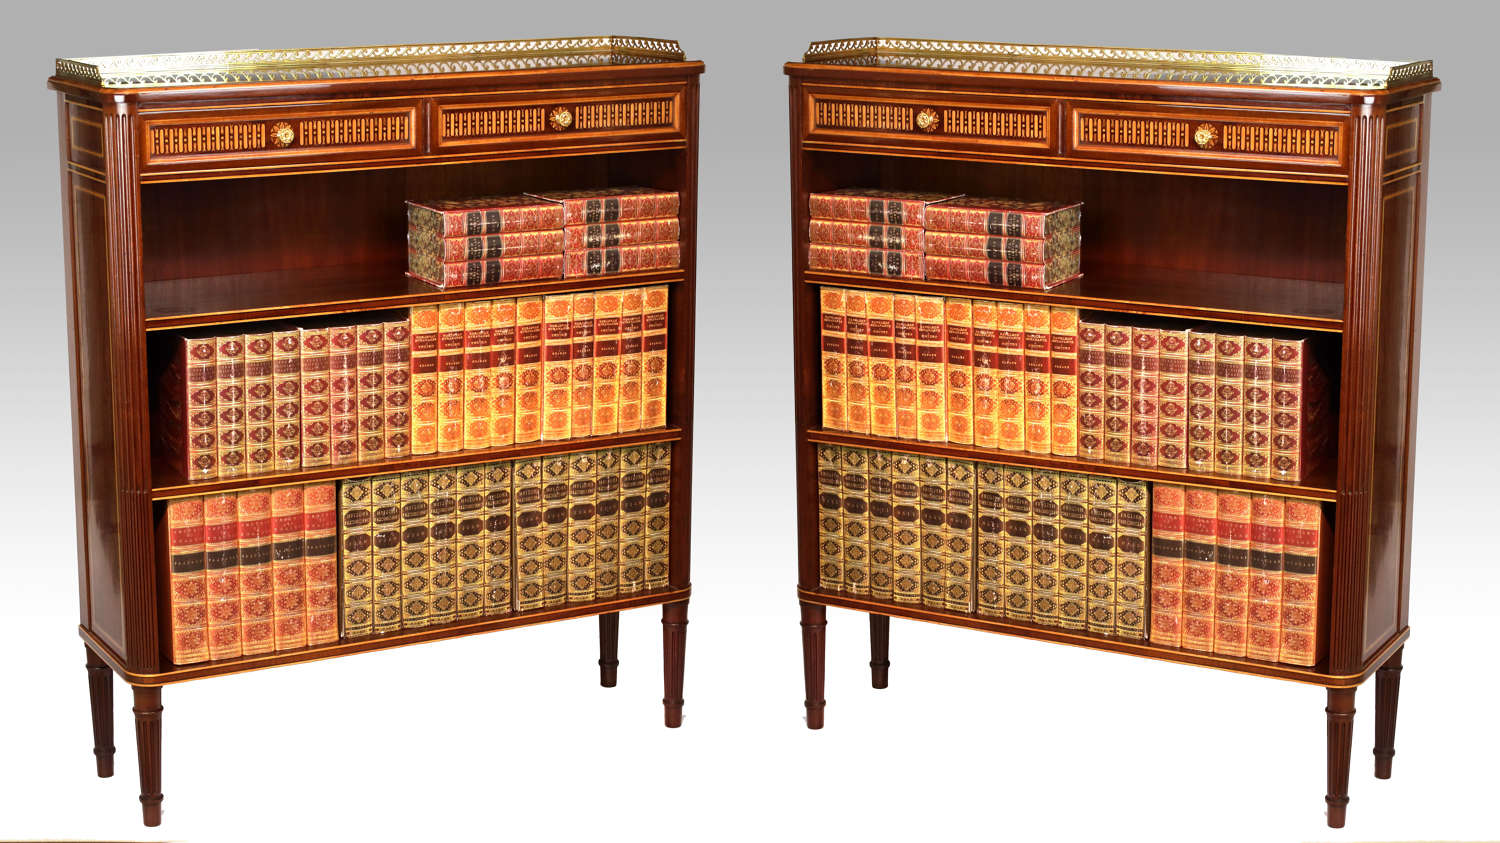 An Exhibition Quality Pair of Mahogany Inlaid Standing Bookcases